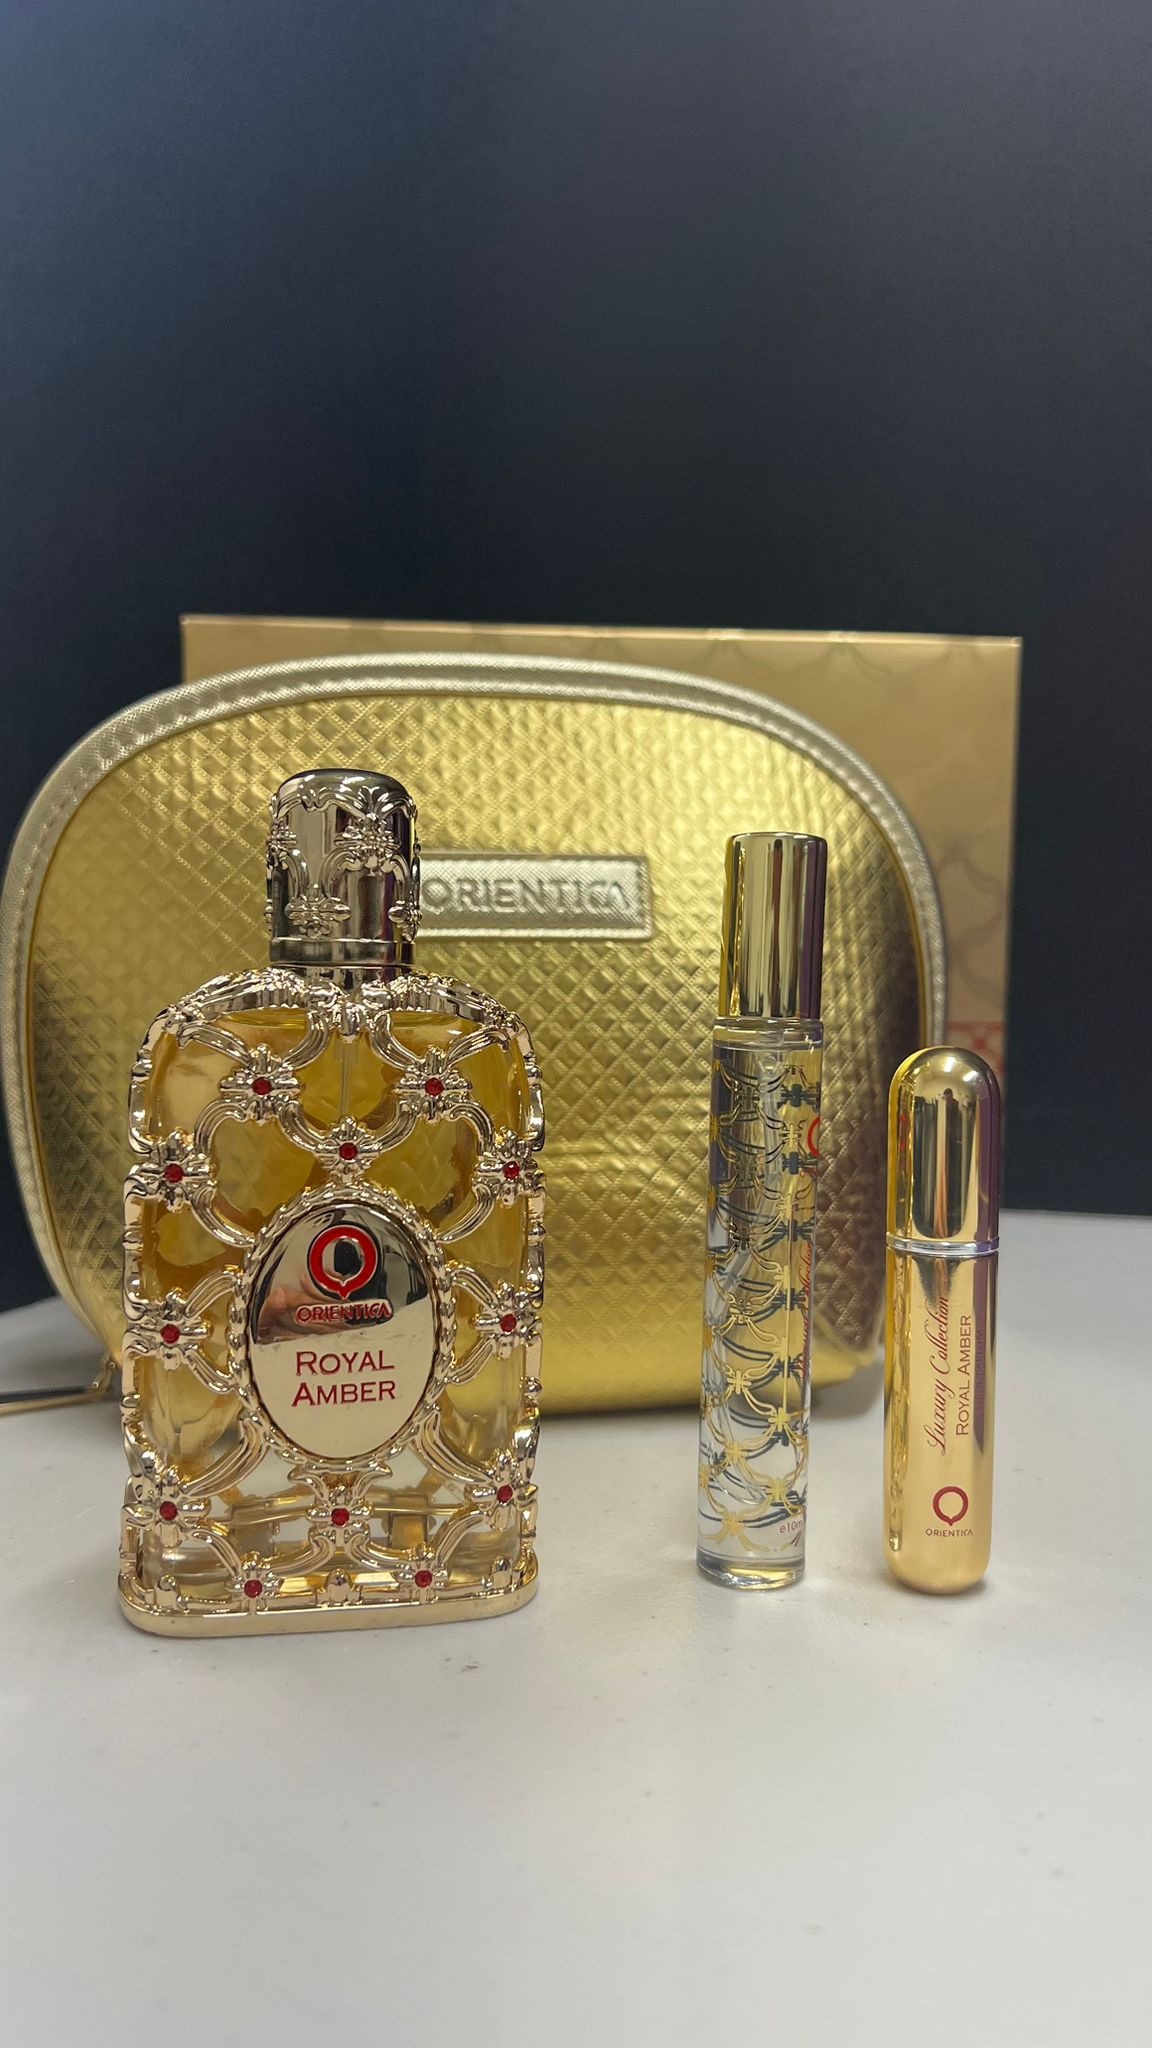 Orientica Royal Amber EDP 2.7 oz Unisex 4 pc. Gift Set by Orientica Luxury  Collection